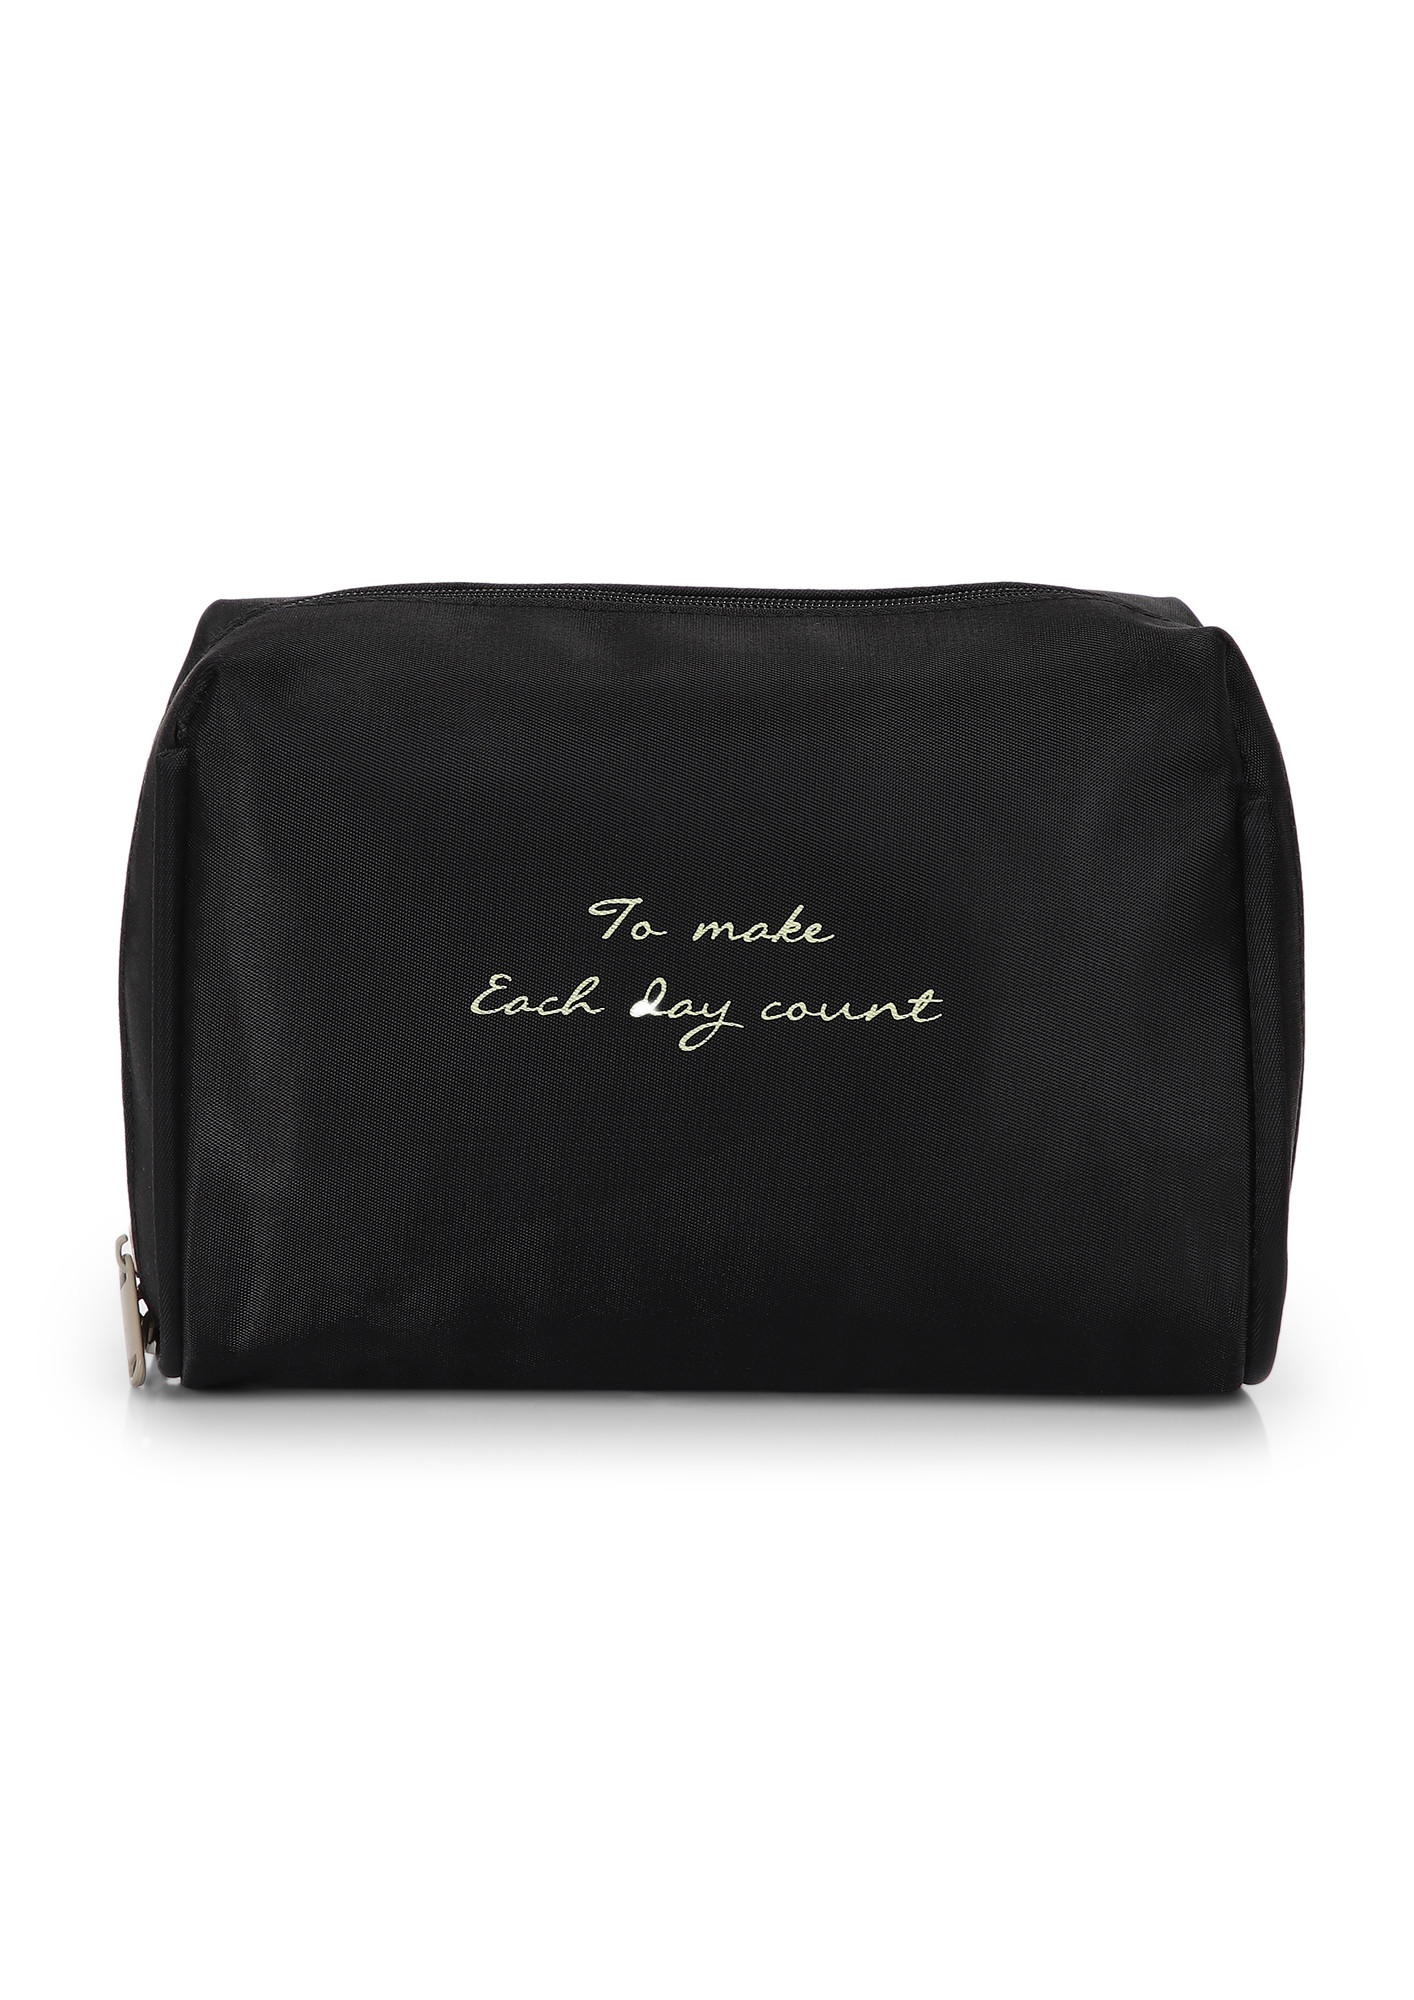 MAKE EACH DAY COUNT BLACK MAKE-UP POUCH 